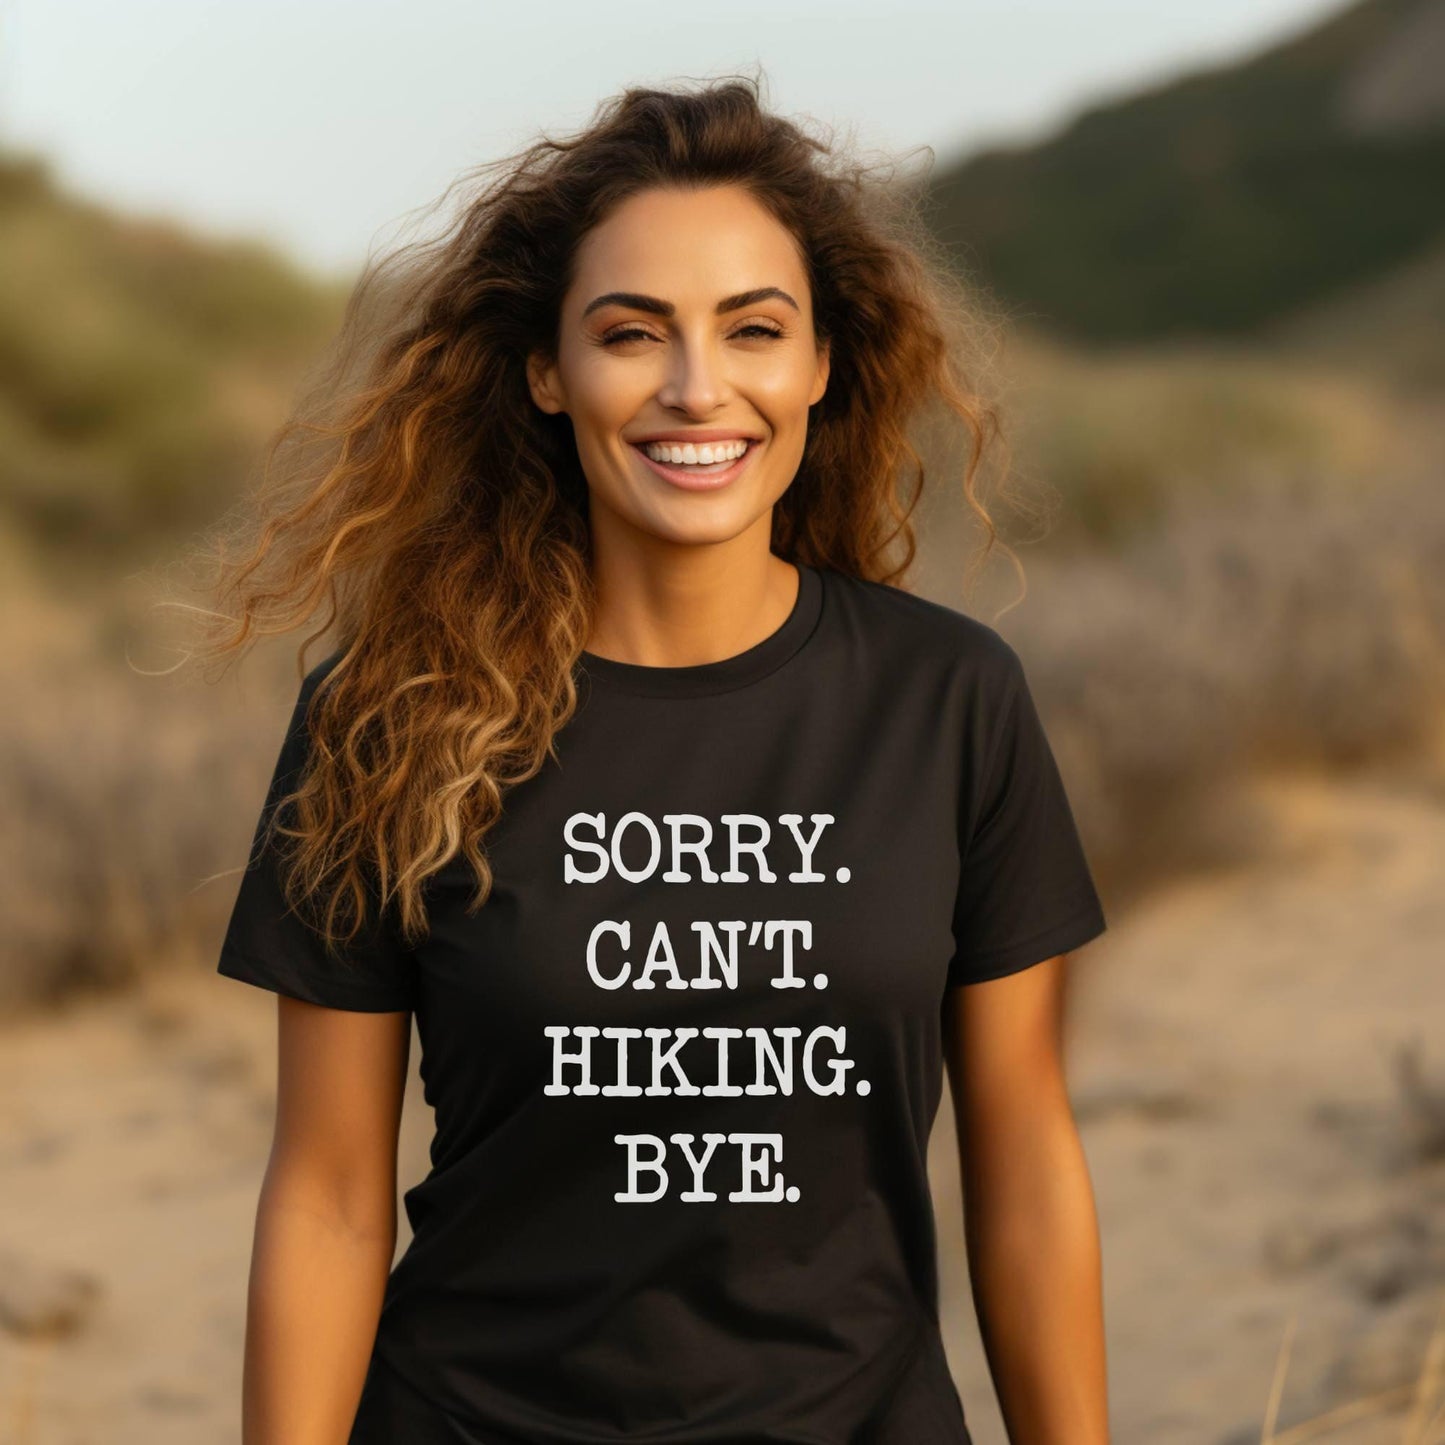 Sorry. Can't. Hiking. Bye. T-Shirt - Adventure Threads Company